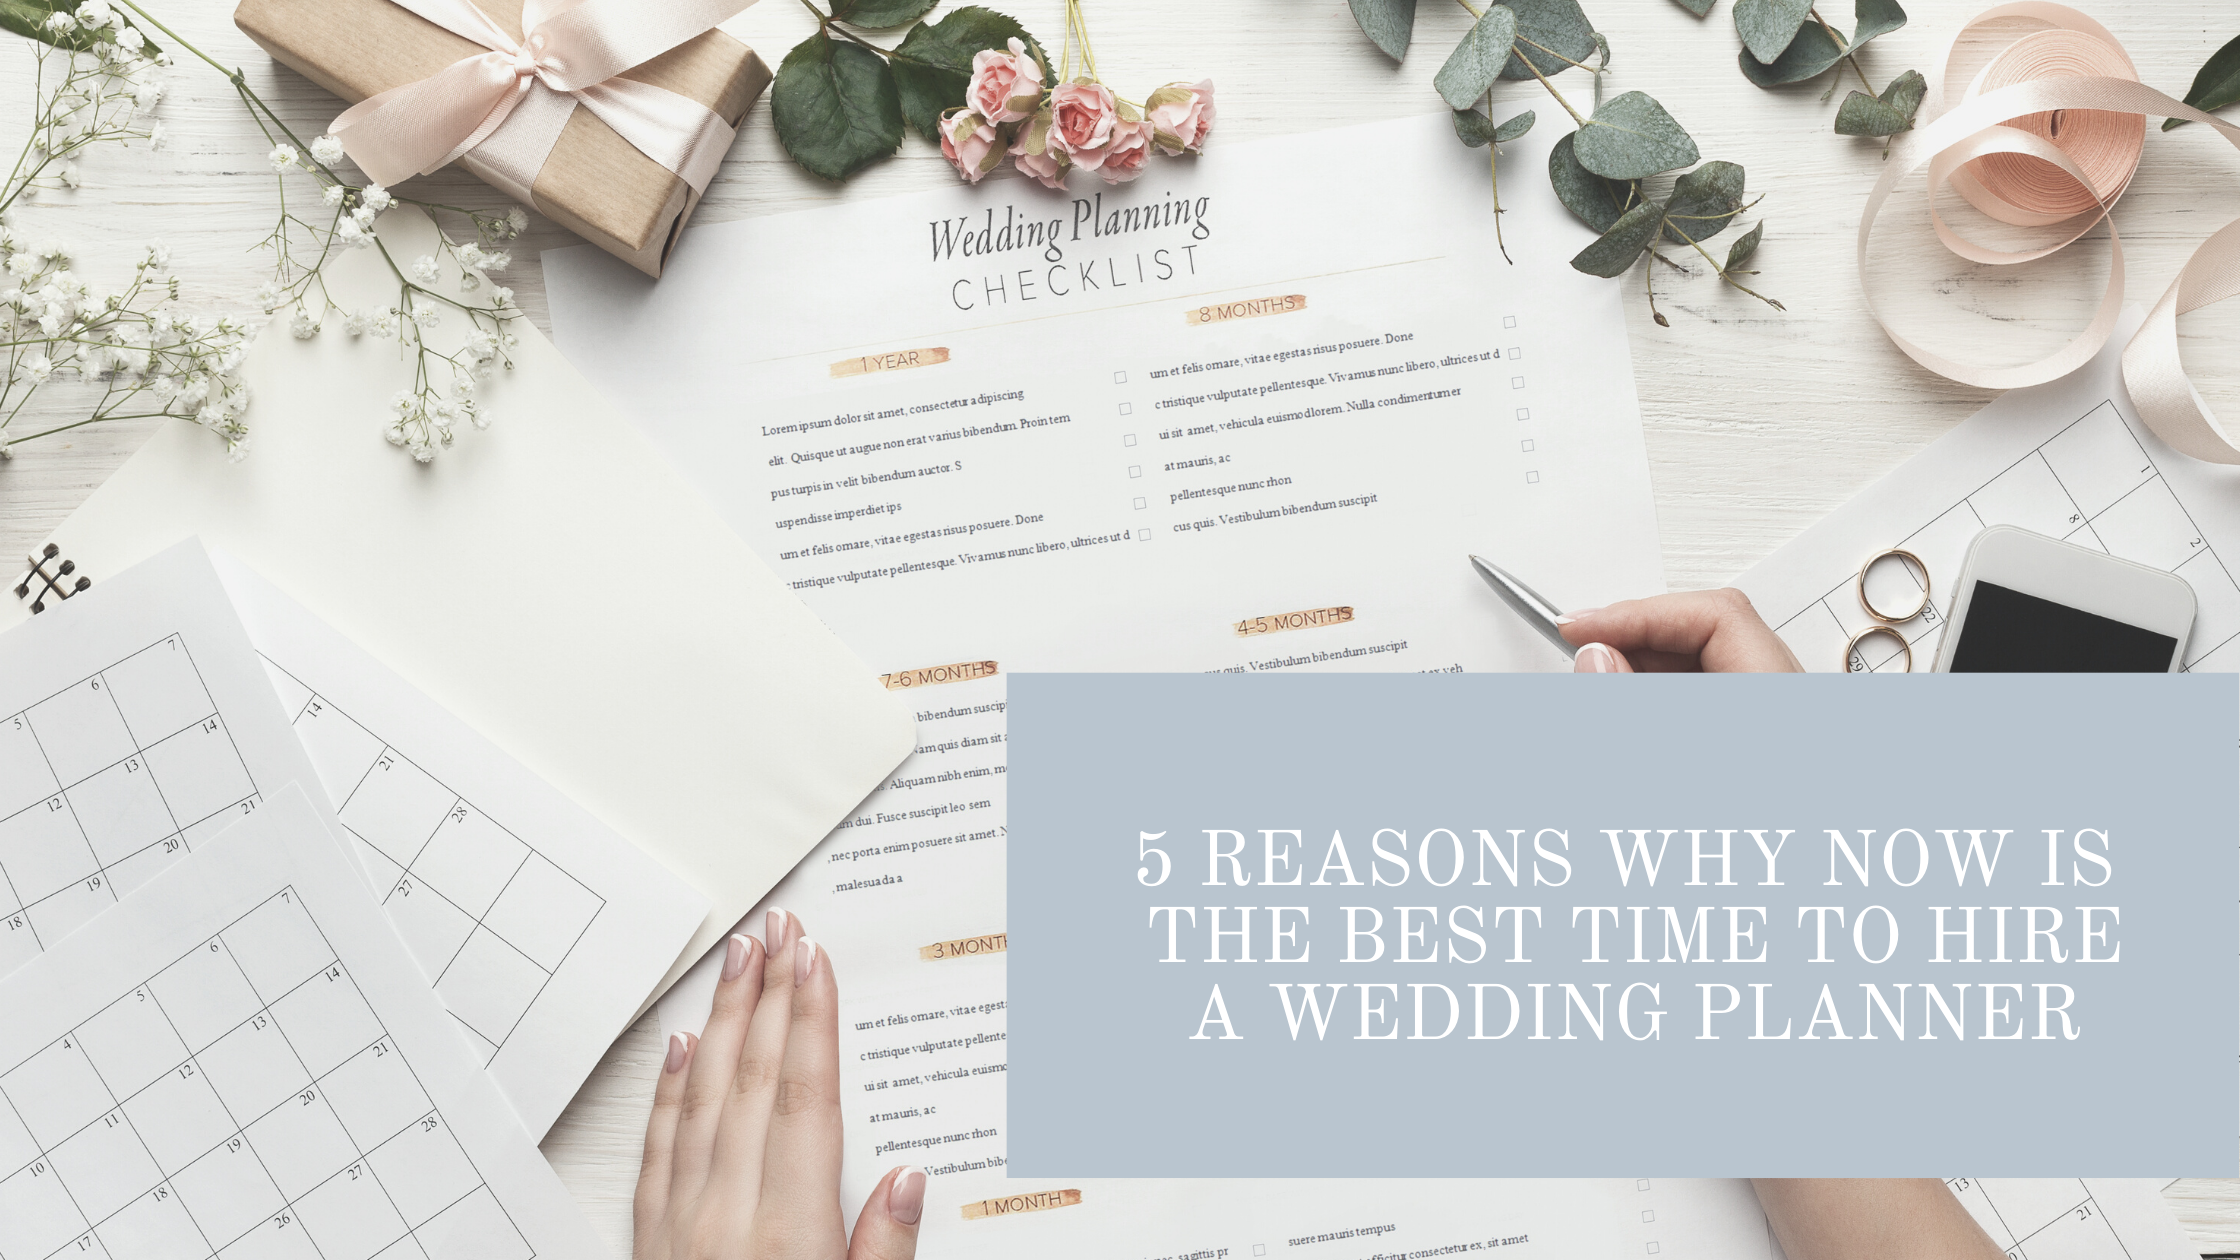 5 reasons why now is the best time to hire a wedding planner